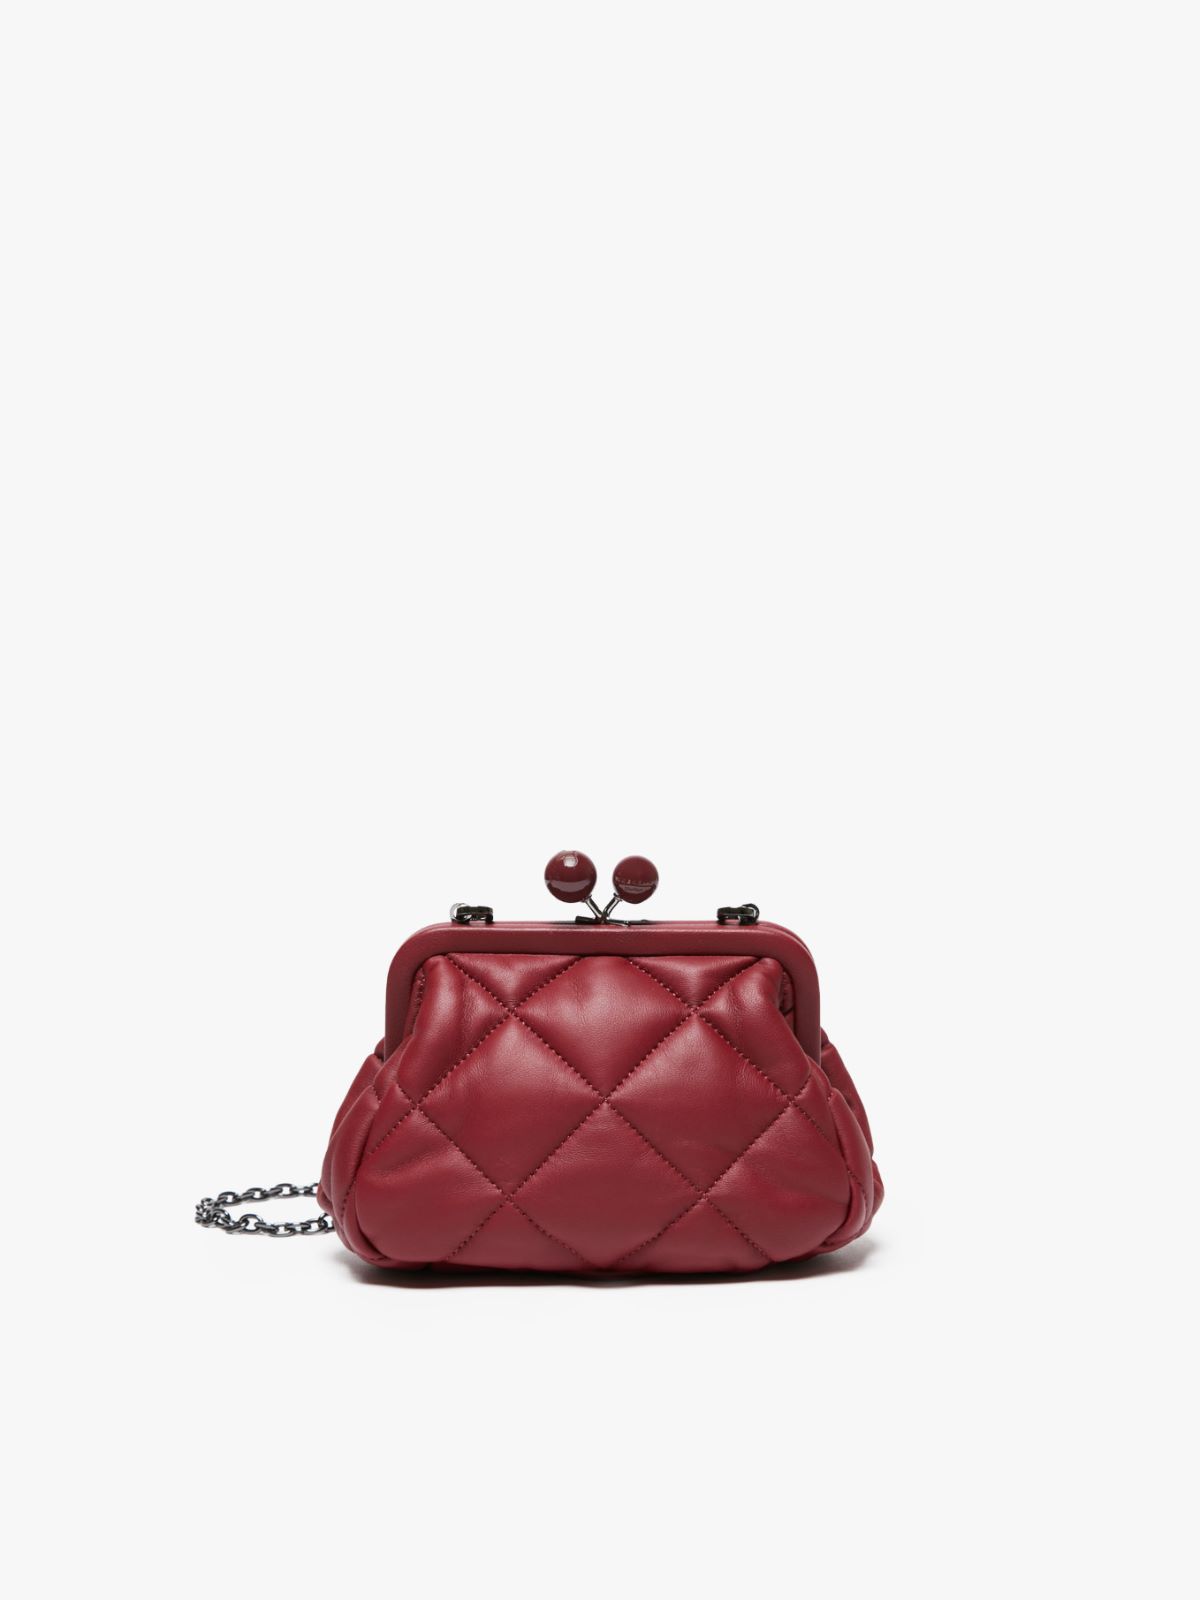 Small Pasticcino Bag in nappa leather - BORDEAUX - Weekend Max Mara